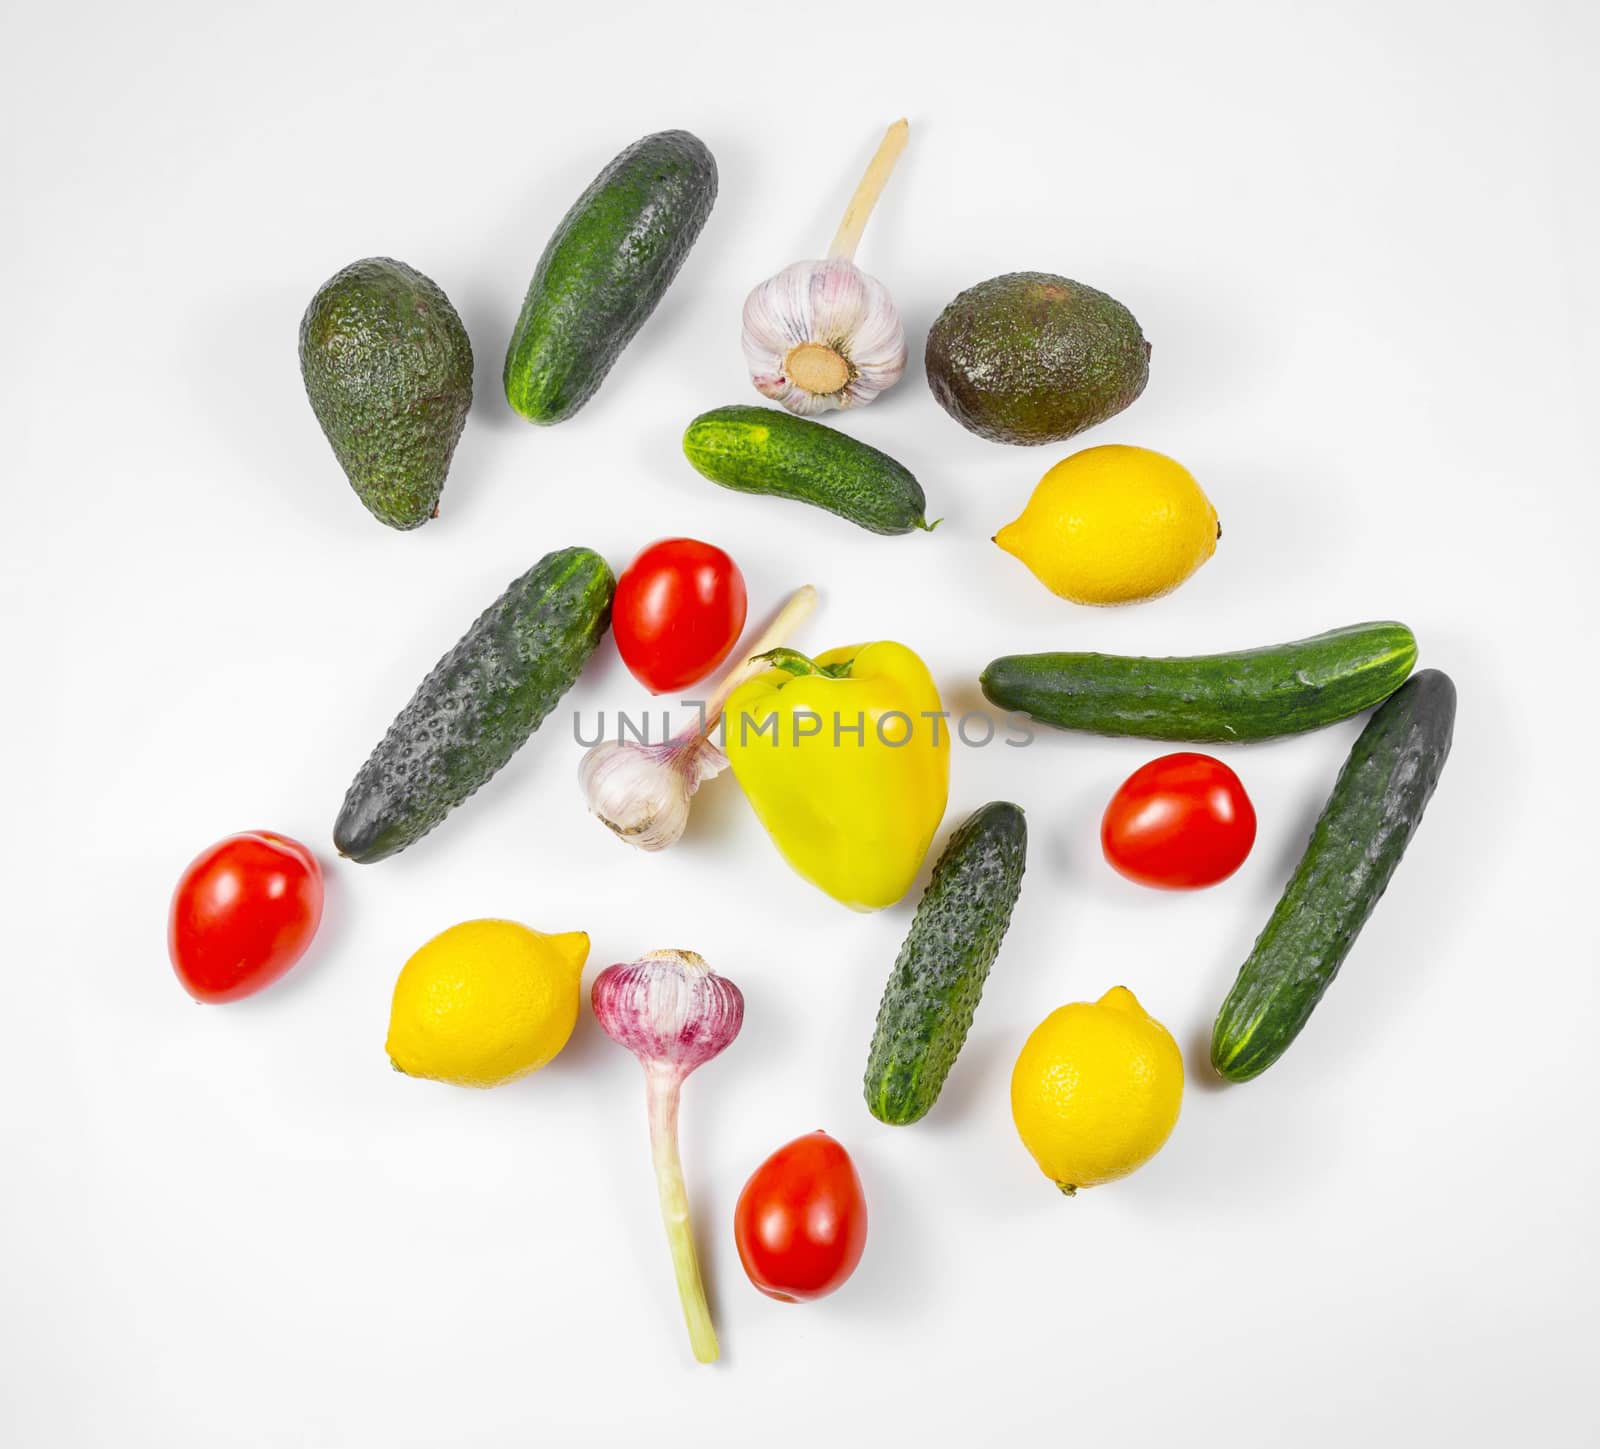 Shopping bag with assortment of fresh vegetables on white background